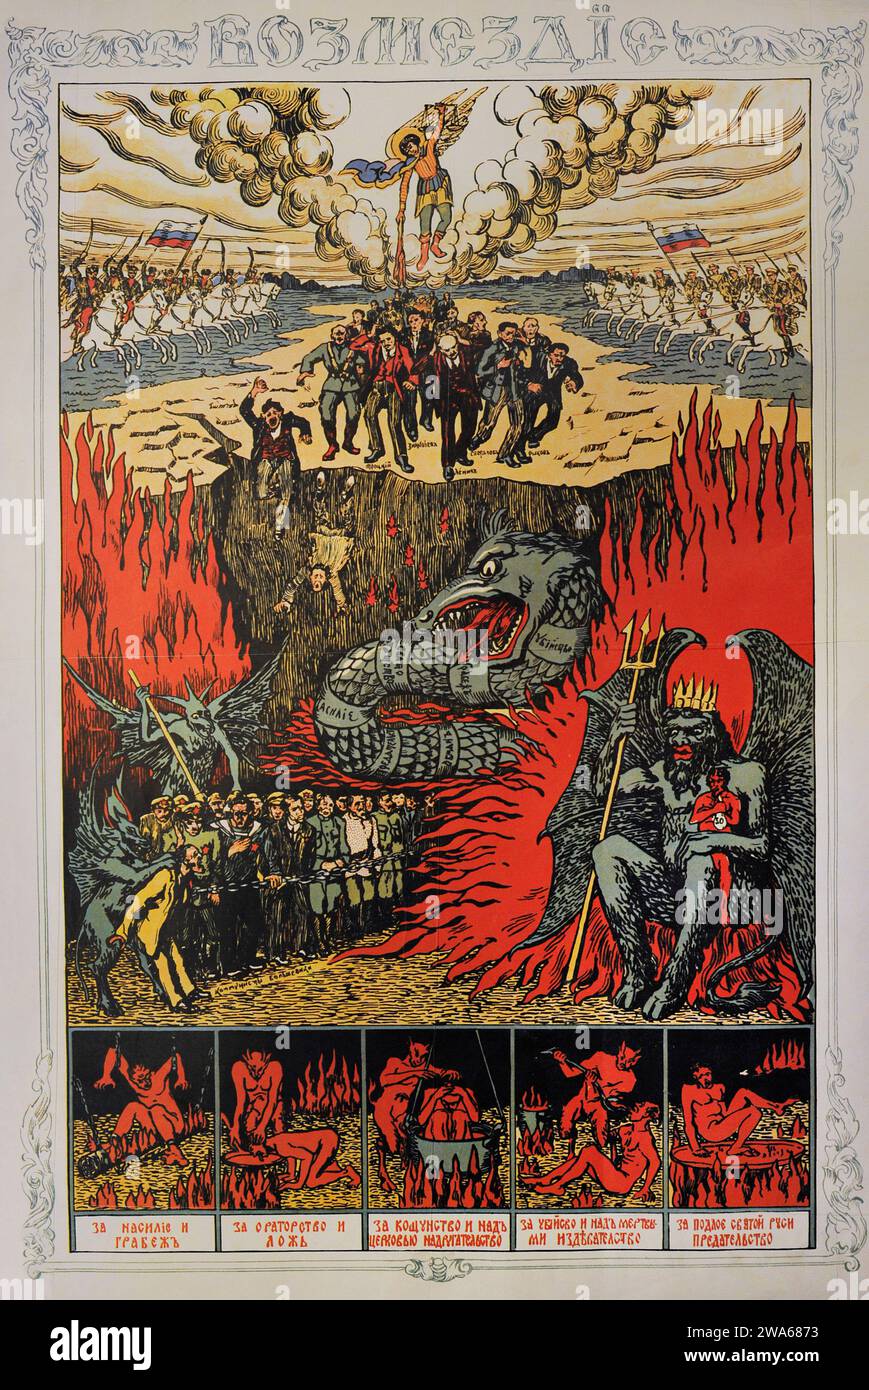 Russian Civil War (1917-1923). Poster directed against Soviet rule 'Vengeance', issued by the Southern anti-Bolshevik armies, 1918-1920. The Bolsheviks the place in hell. Unknown author. Stock Photo